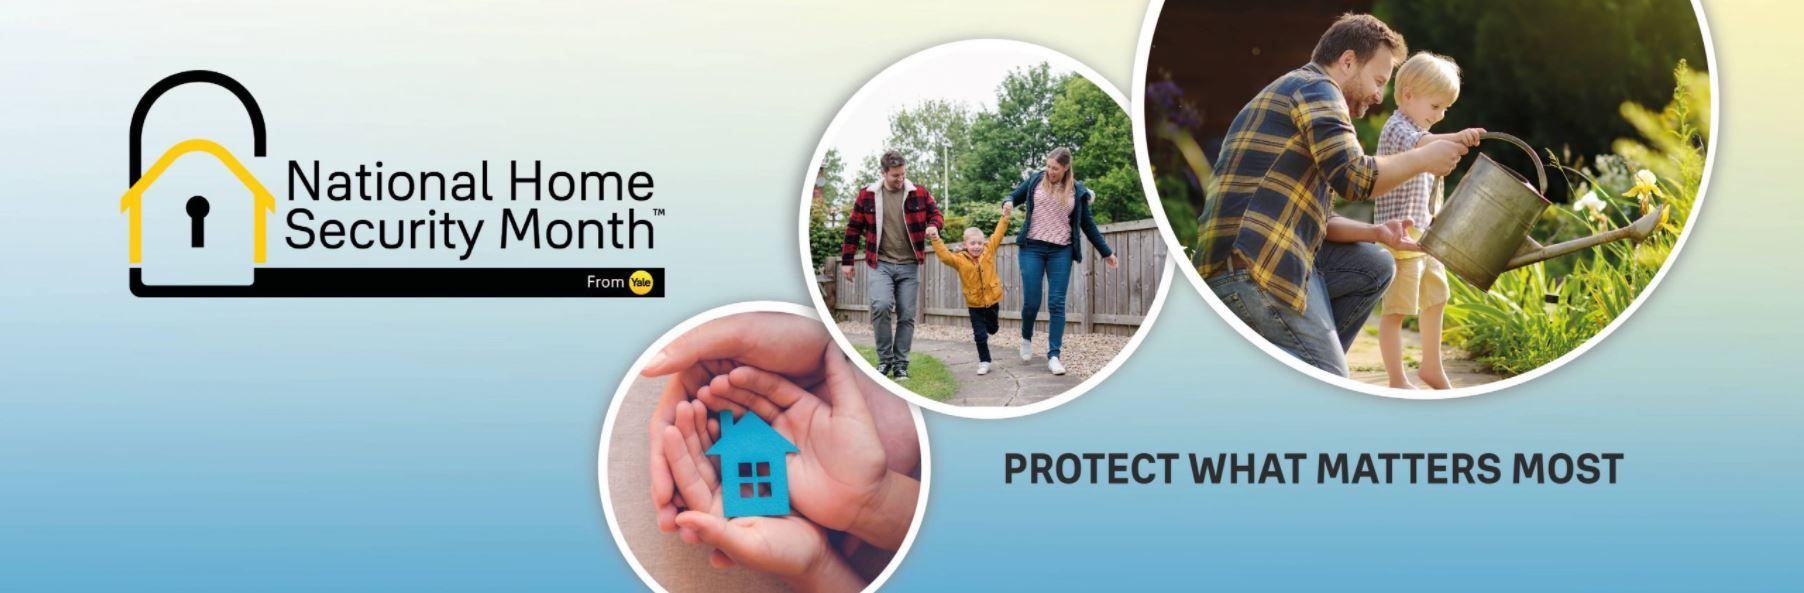 Police CPI supports National Home Security Month 2021